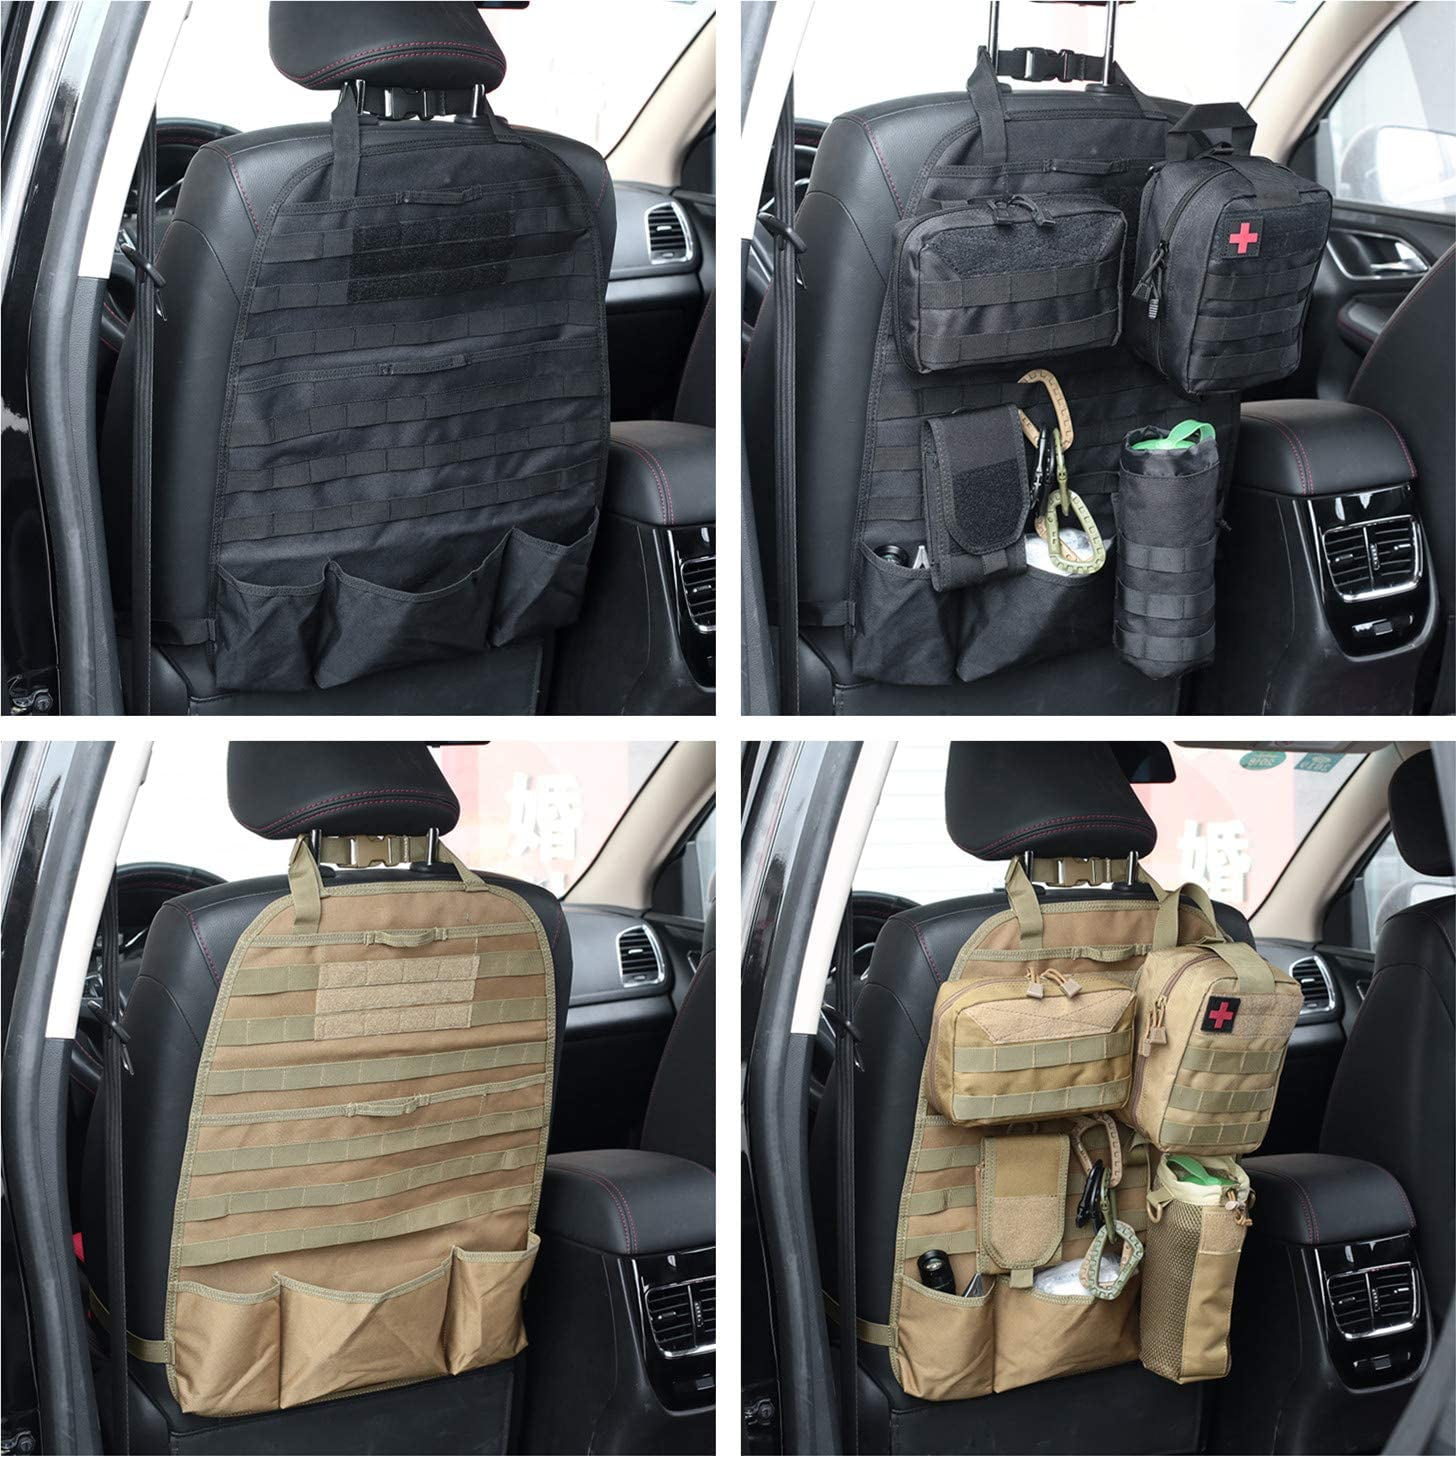 Upgraded Tactical Molle Vehicle Panel Universal Fit Car Seat Cover Protector with Extra USA Flag Patch 2 Pack-Black Tacticool Car Seat Back Organizer 